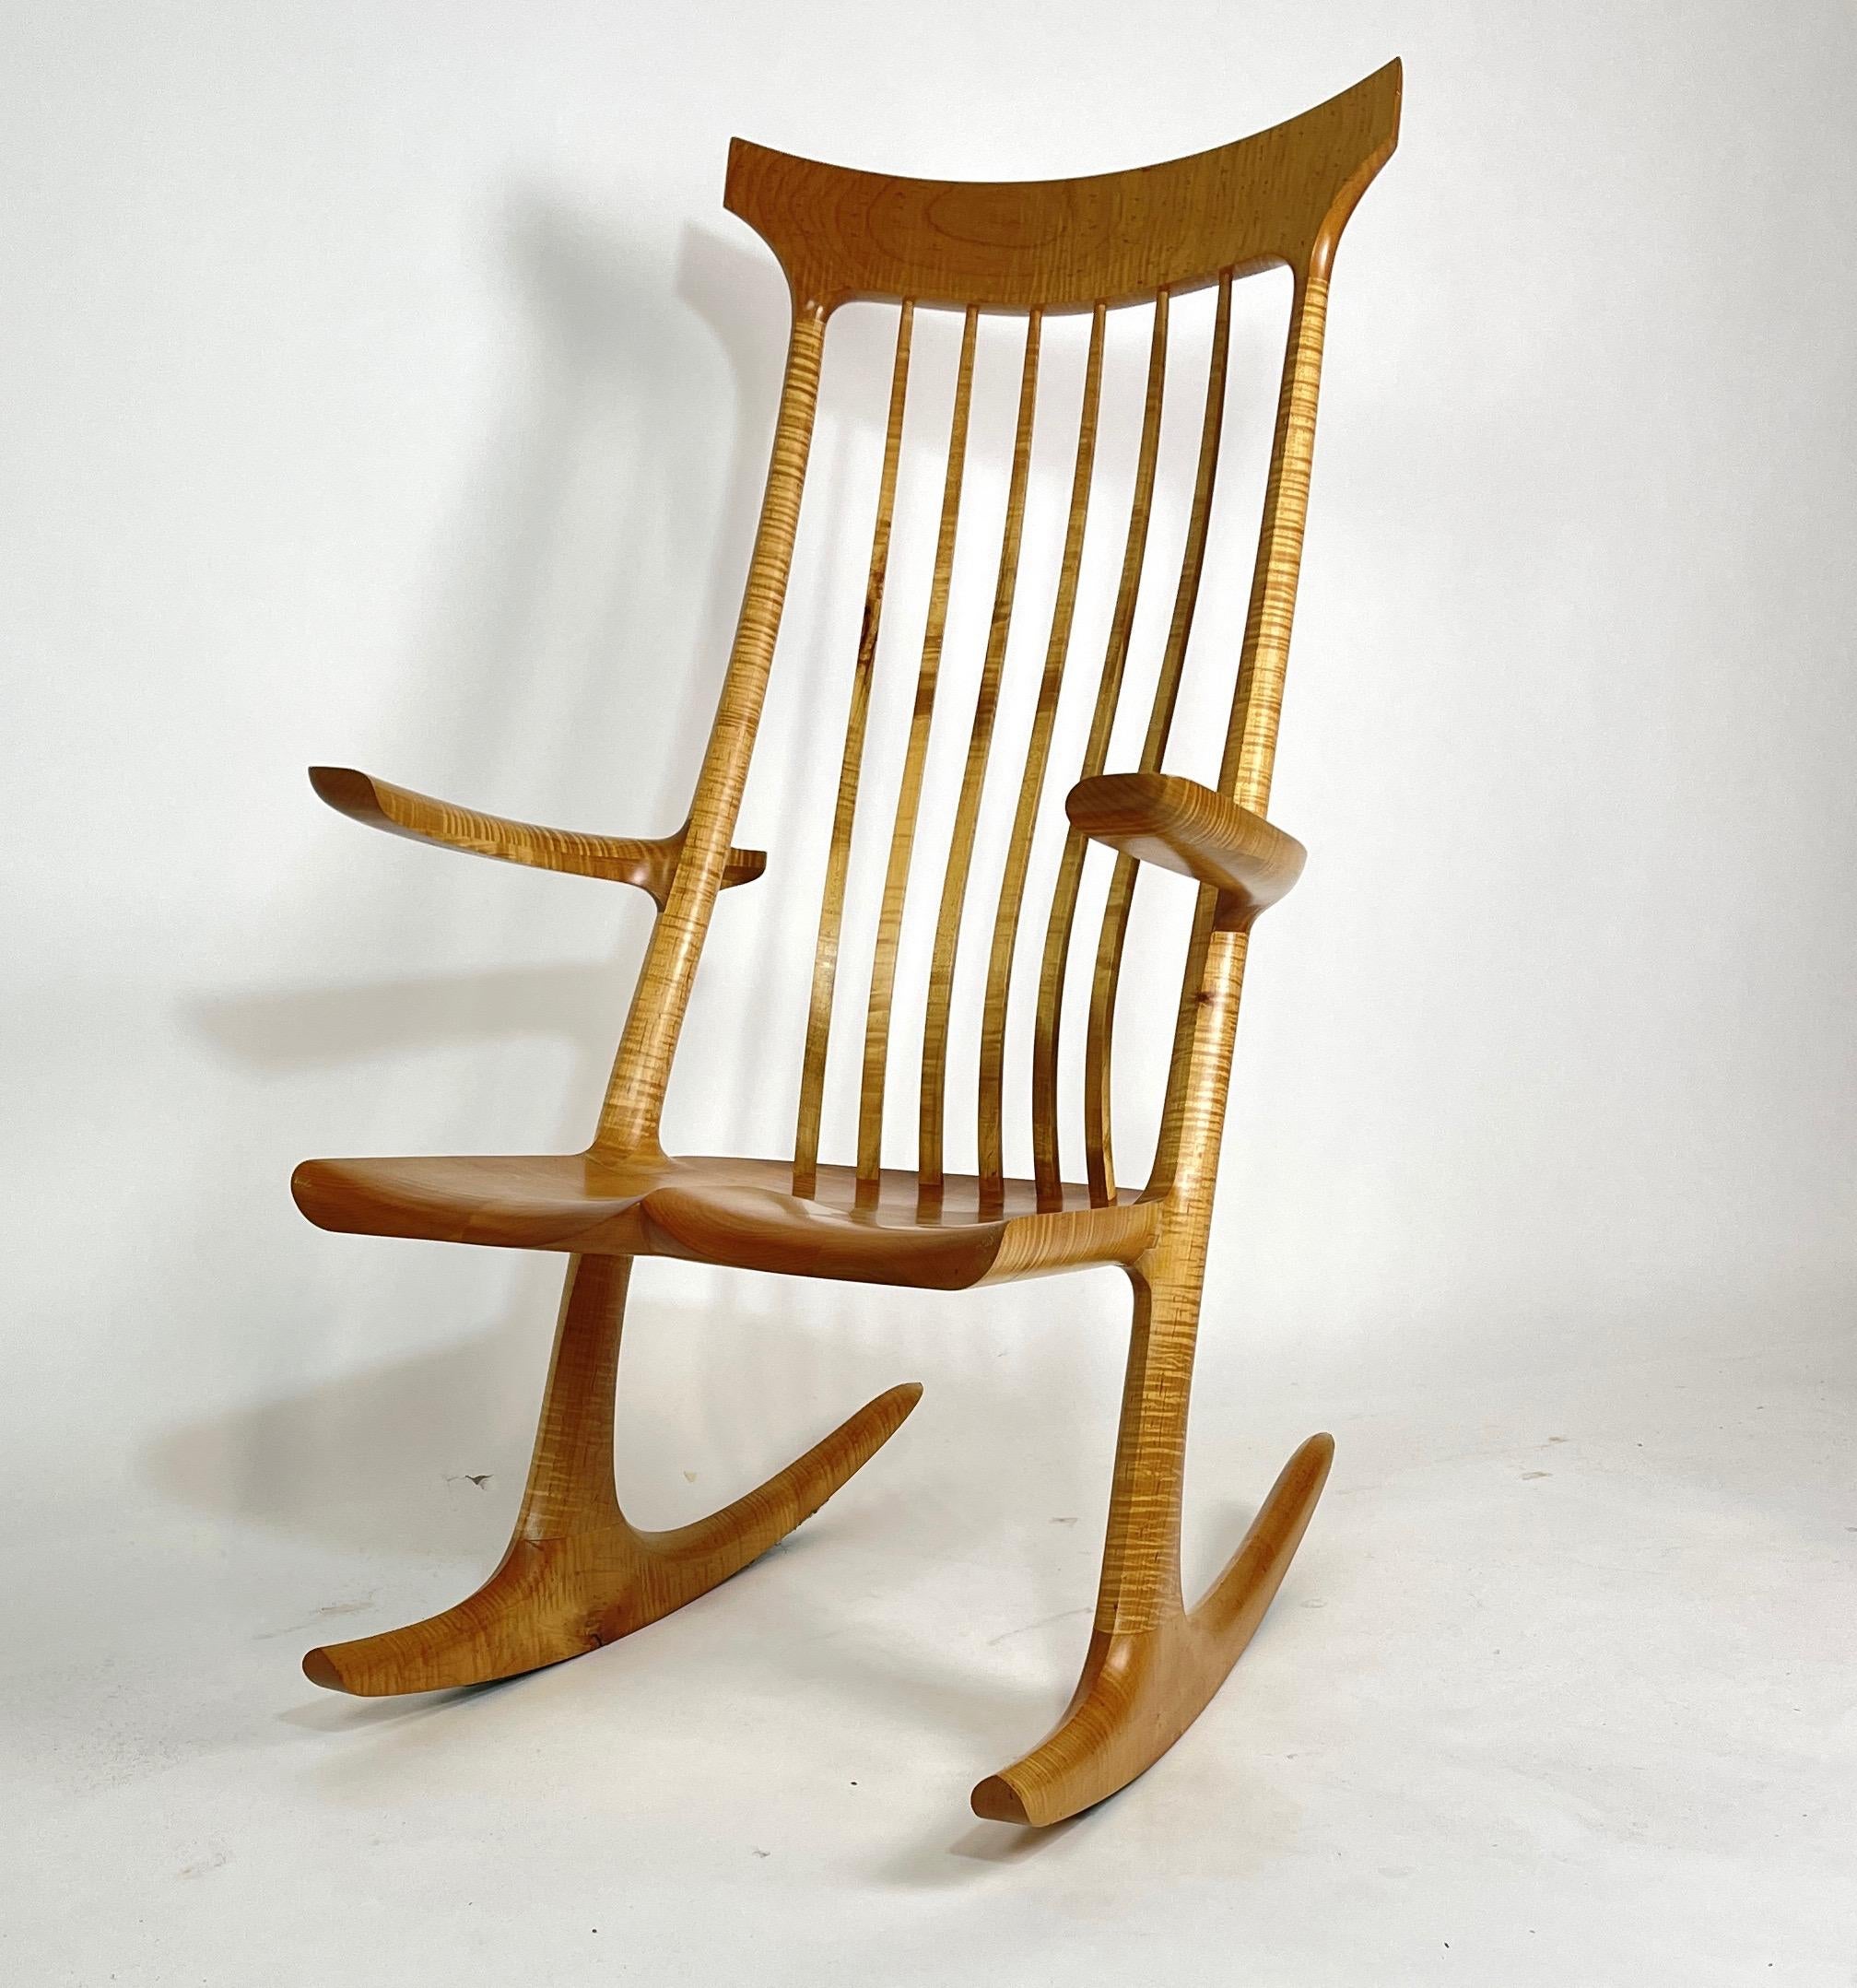 Hand-Carved Sculptural Studio Handcrafted Rocker Rocking Chair in Curly Maple